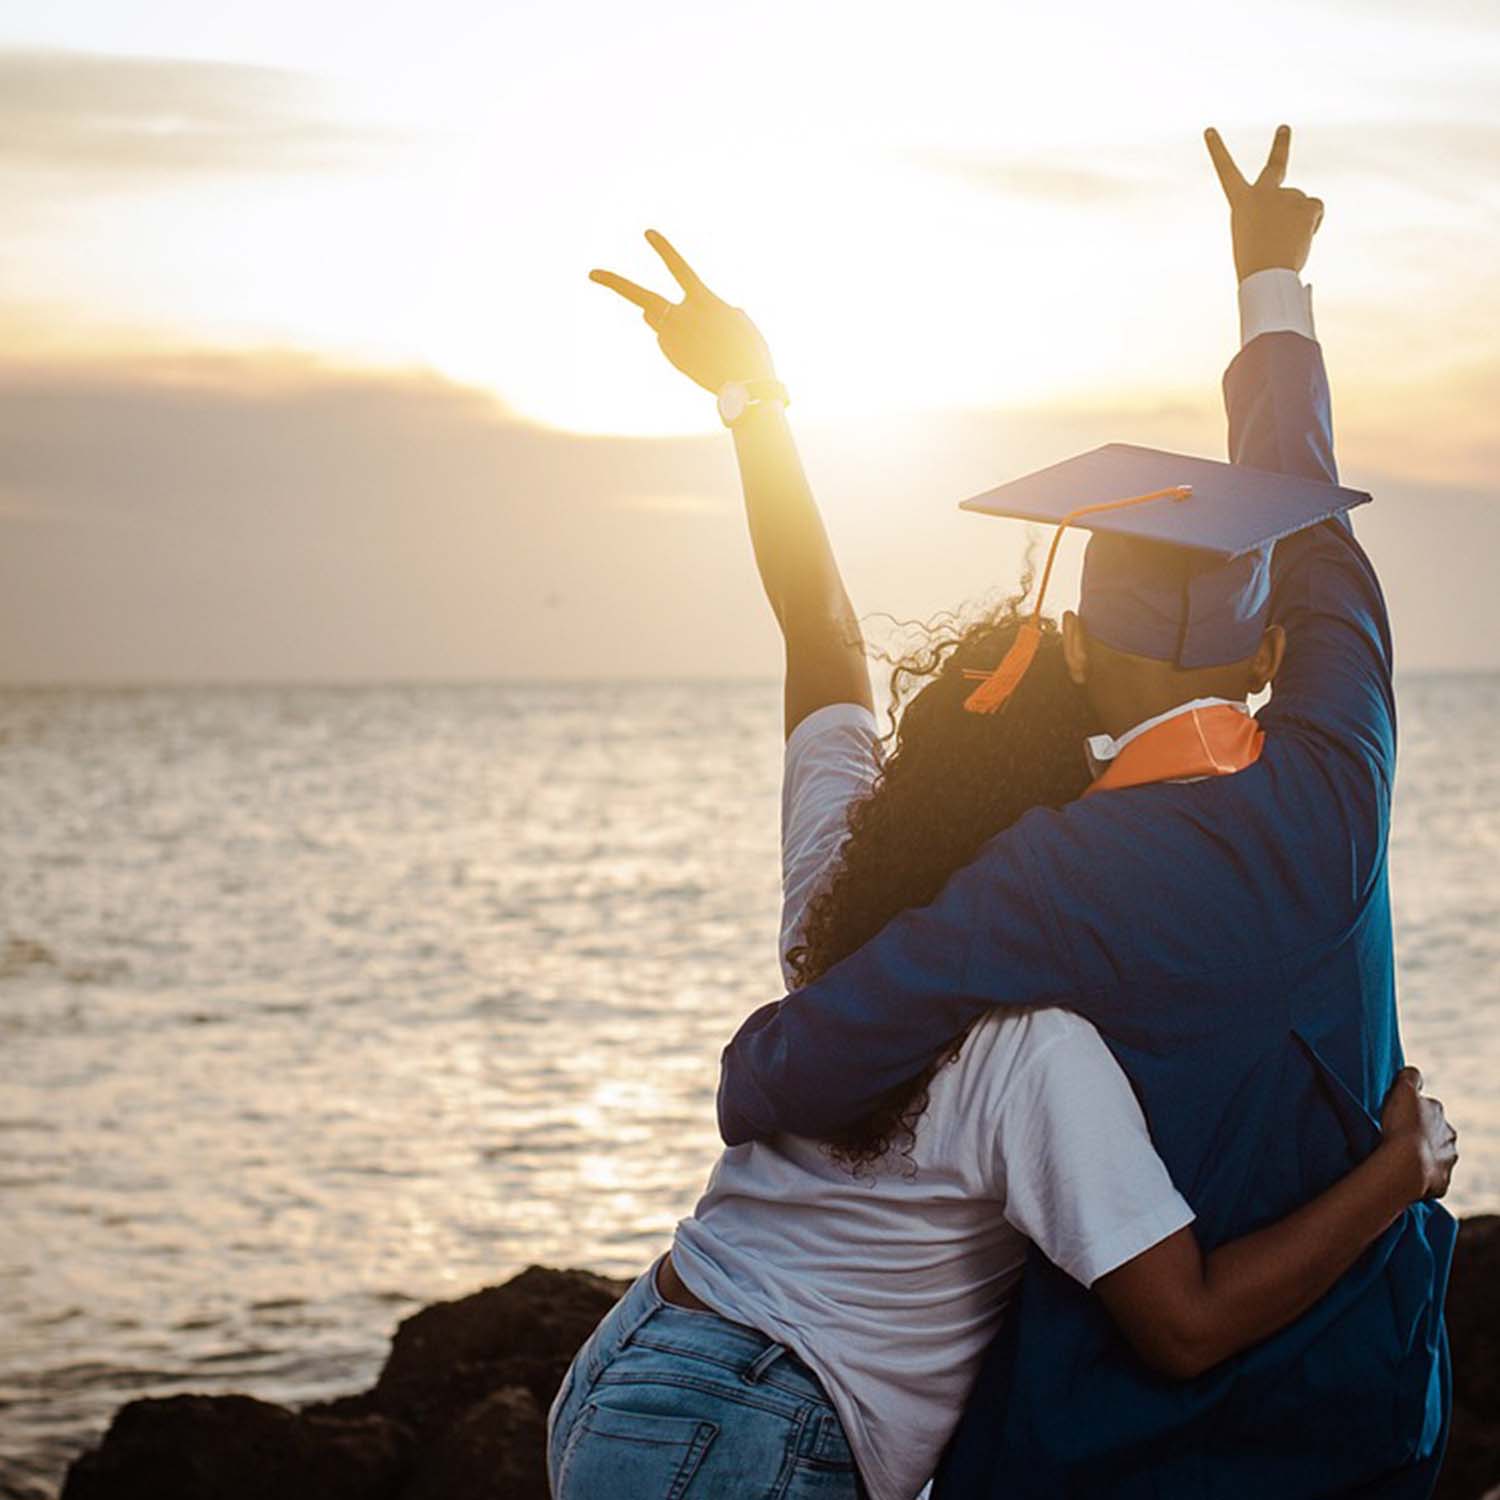 Photo of a person hugging someone in a graduation cap and gown while looking at the sunset.